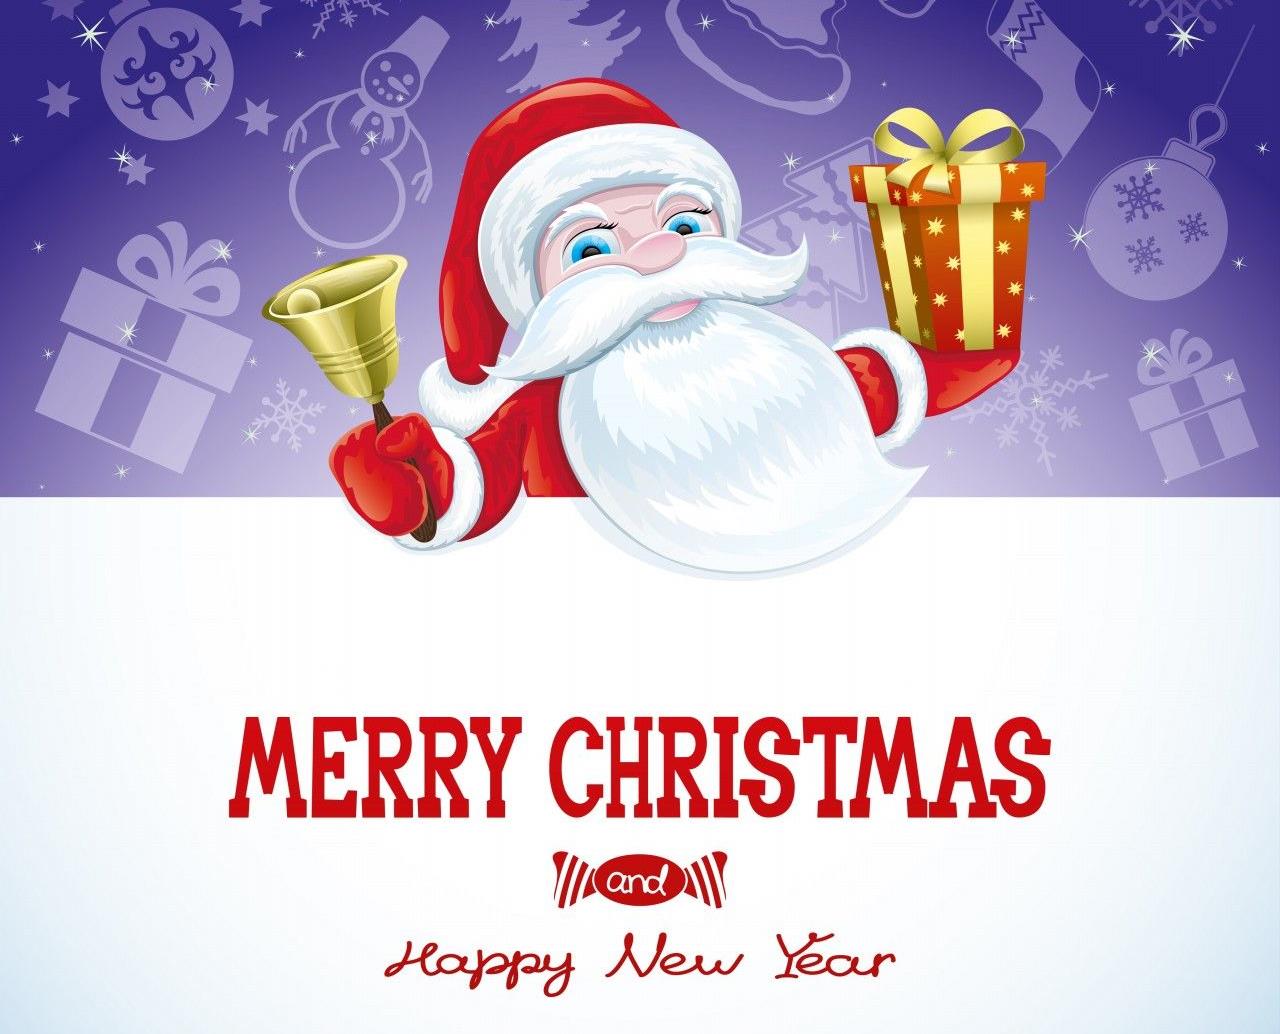 Marry Christmas & Happy New Year 2016